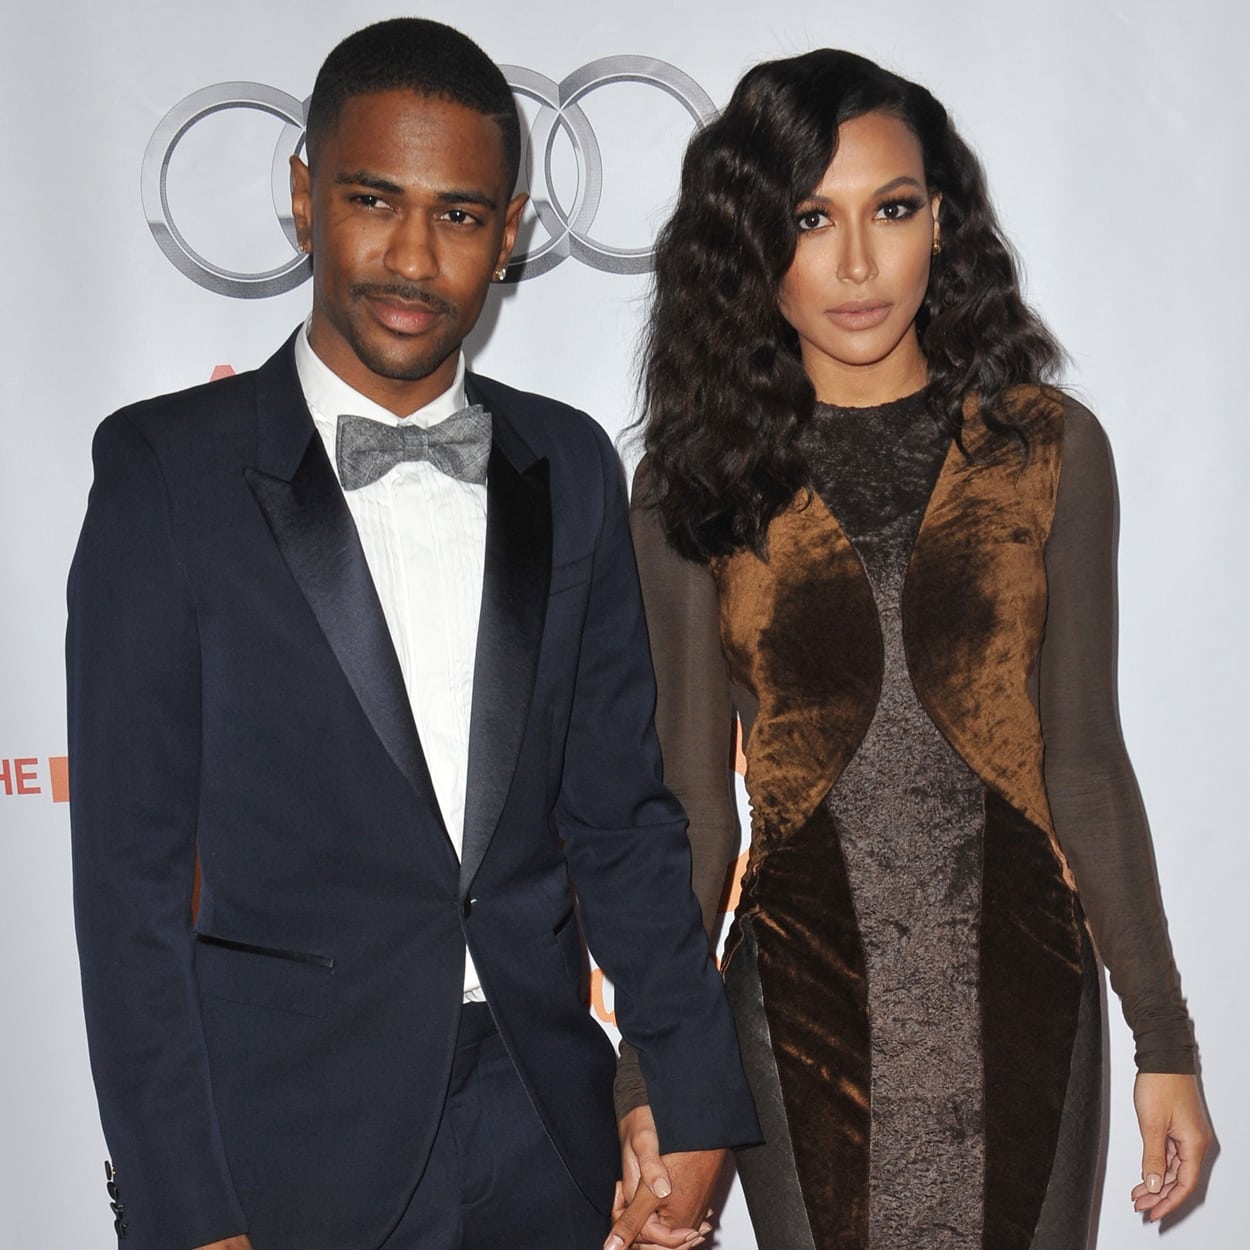 Naya Rivera and Big Sean began dating in April 2013 and were engaged for a few months before they split up in April 2014